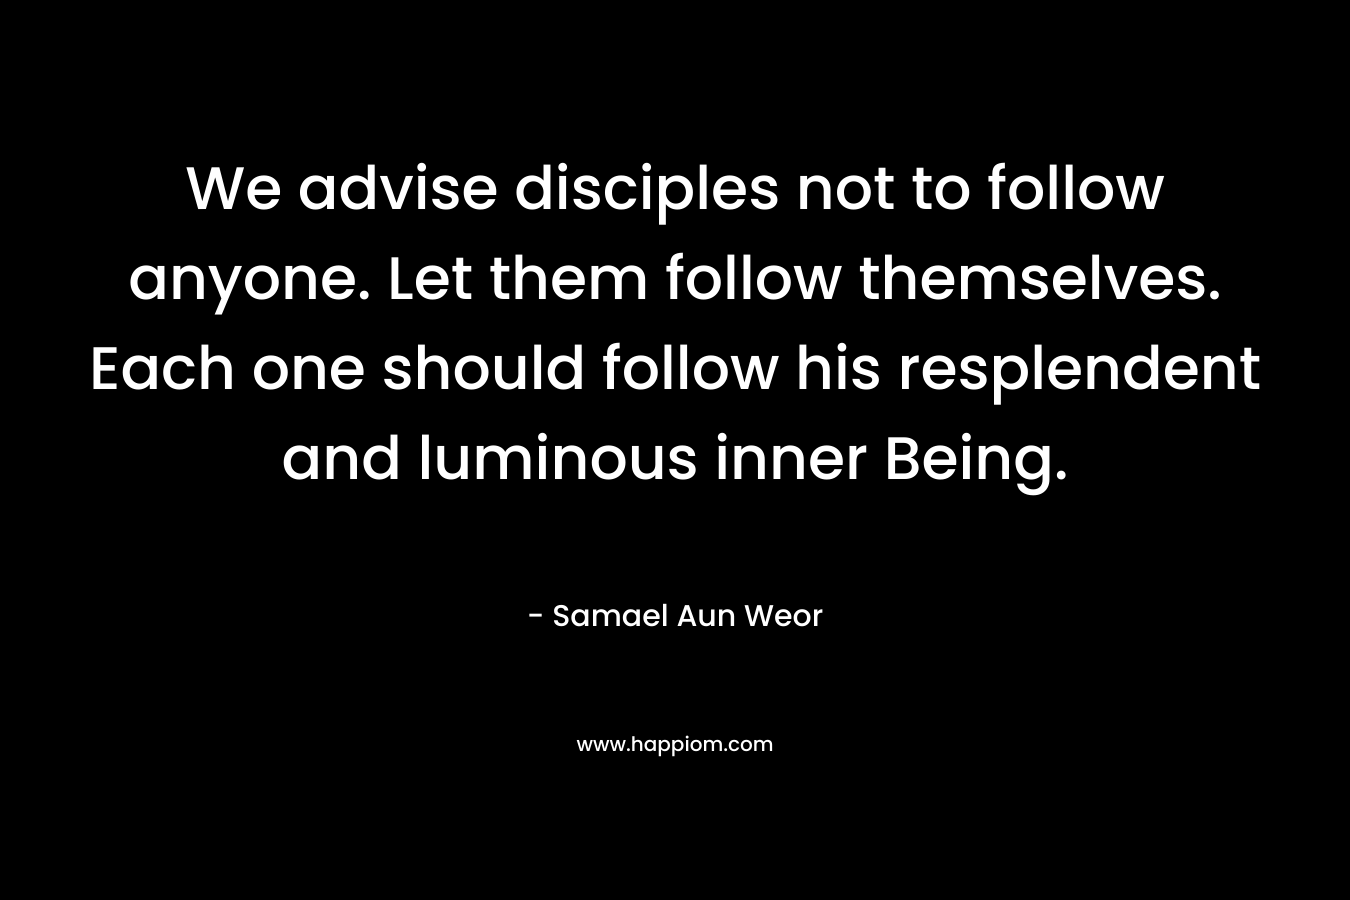 We advise disciples not to follow anyone. Let them follow themselves. Each one should follow his resplendent and luminous inner Being. – Samael Aun Weor